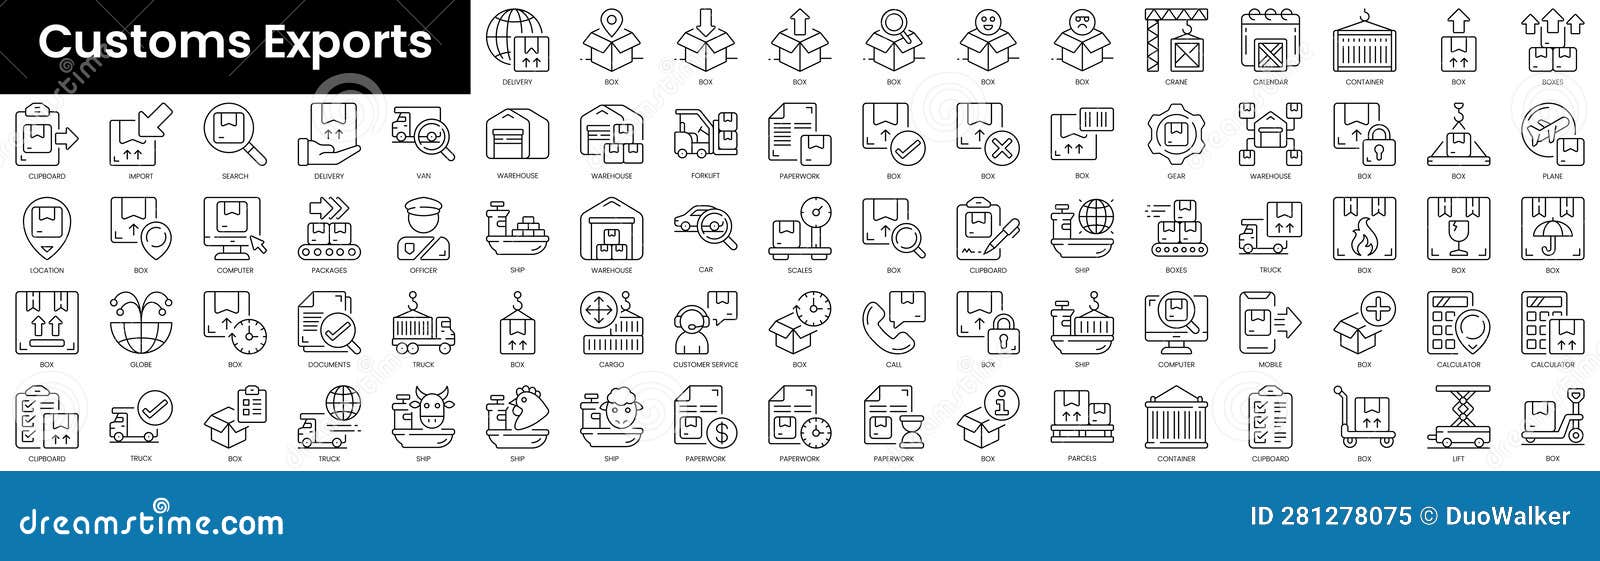 set of outline customs exports icons. minimalist thin linear web icon set.  